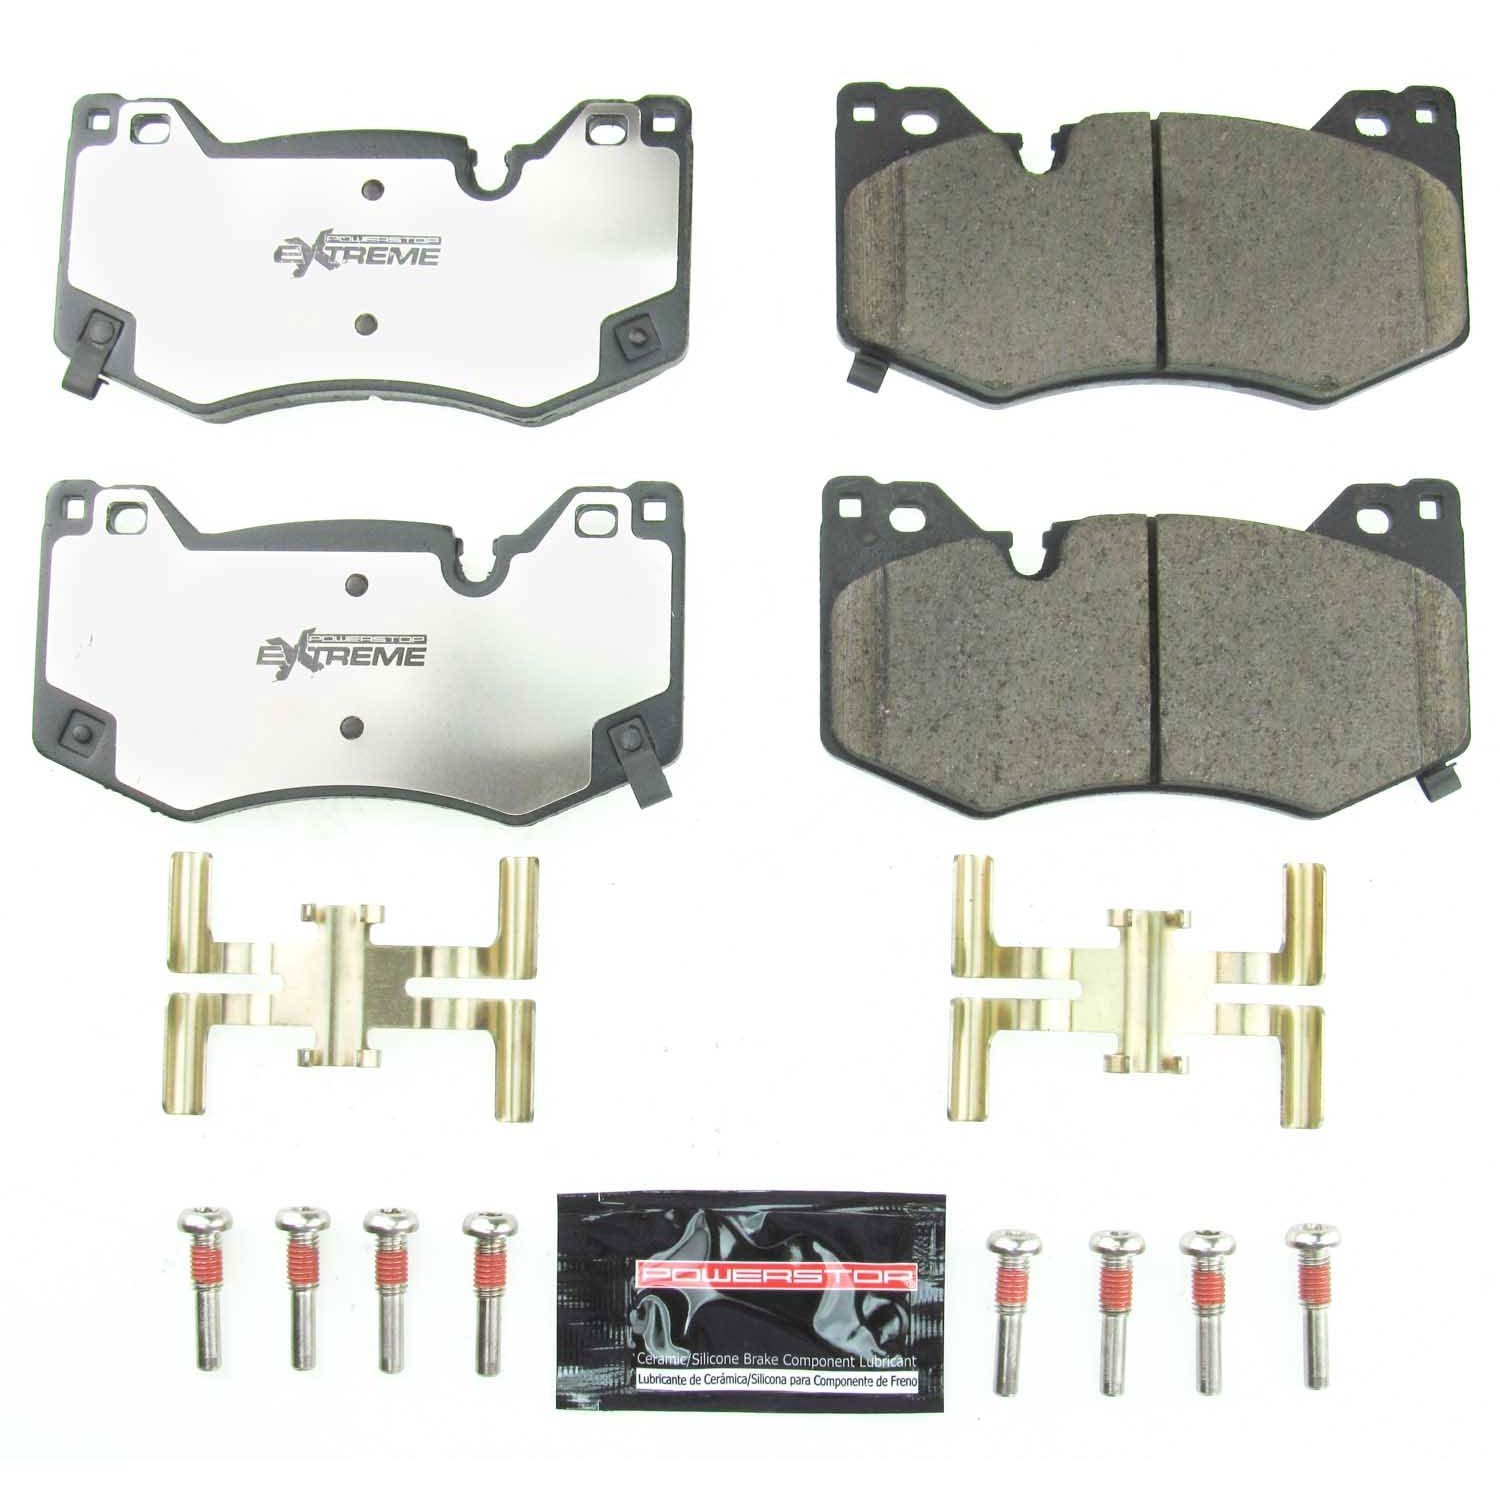 Z26 Street Warrior Front Brake Pads Fits Select Cadillac, Chevrolet Models